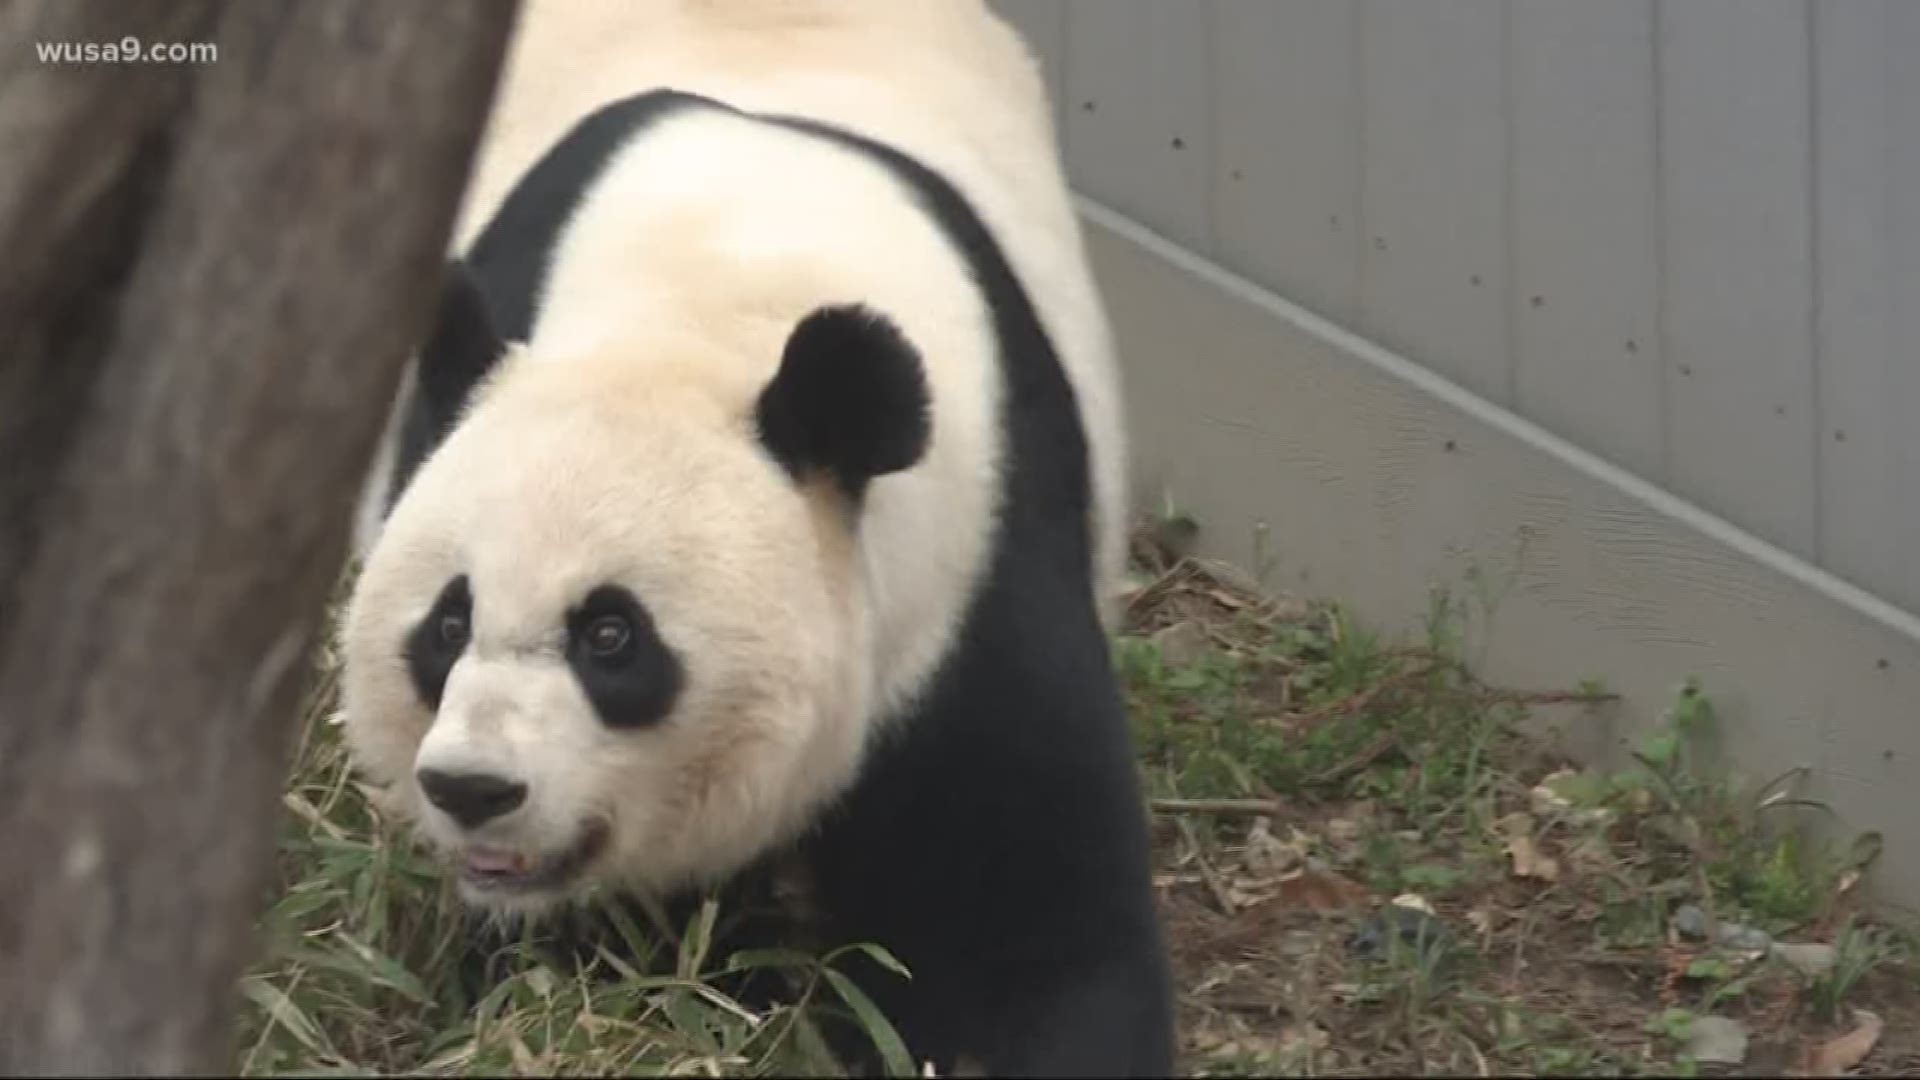 Scientists and panda keepers won't know if Mei Xiang is pregnant for several months